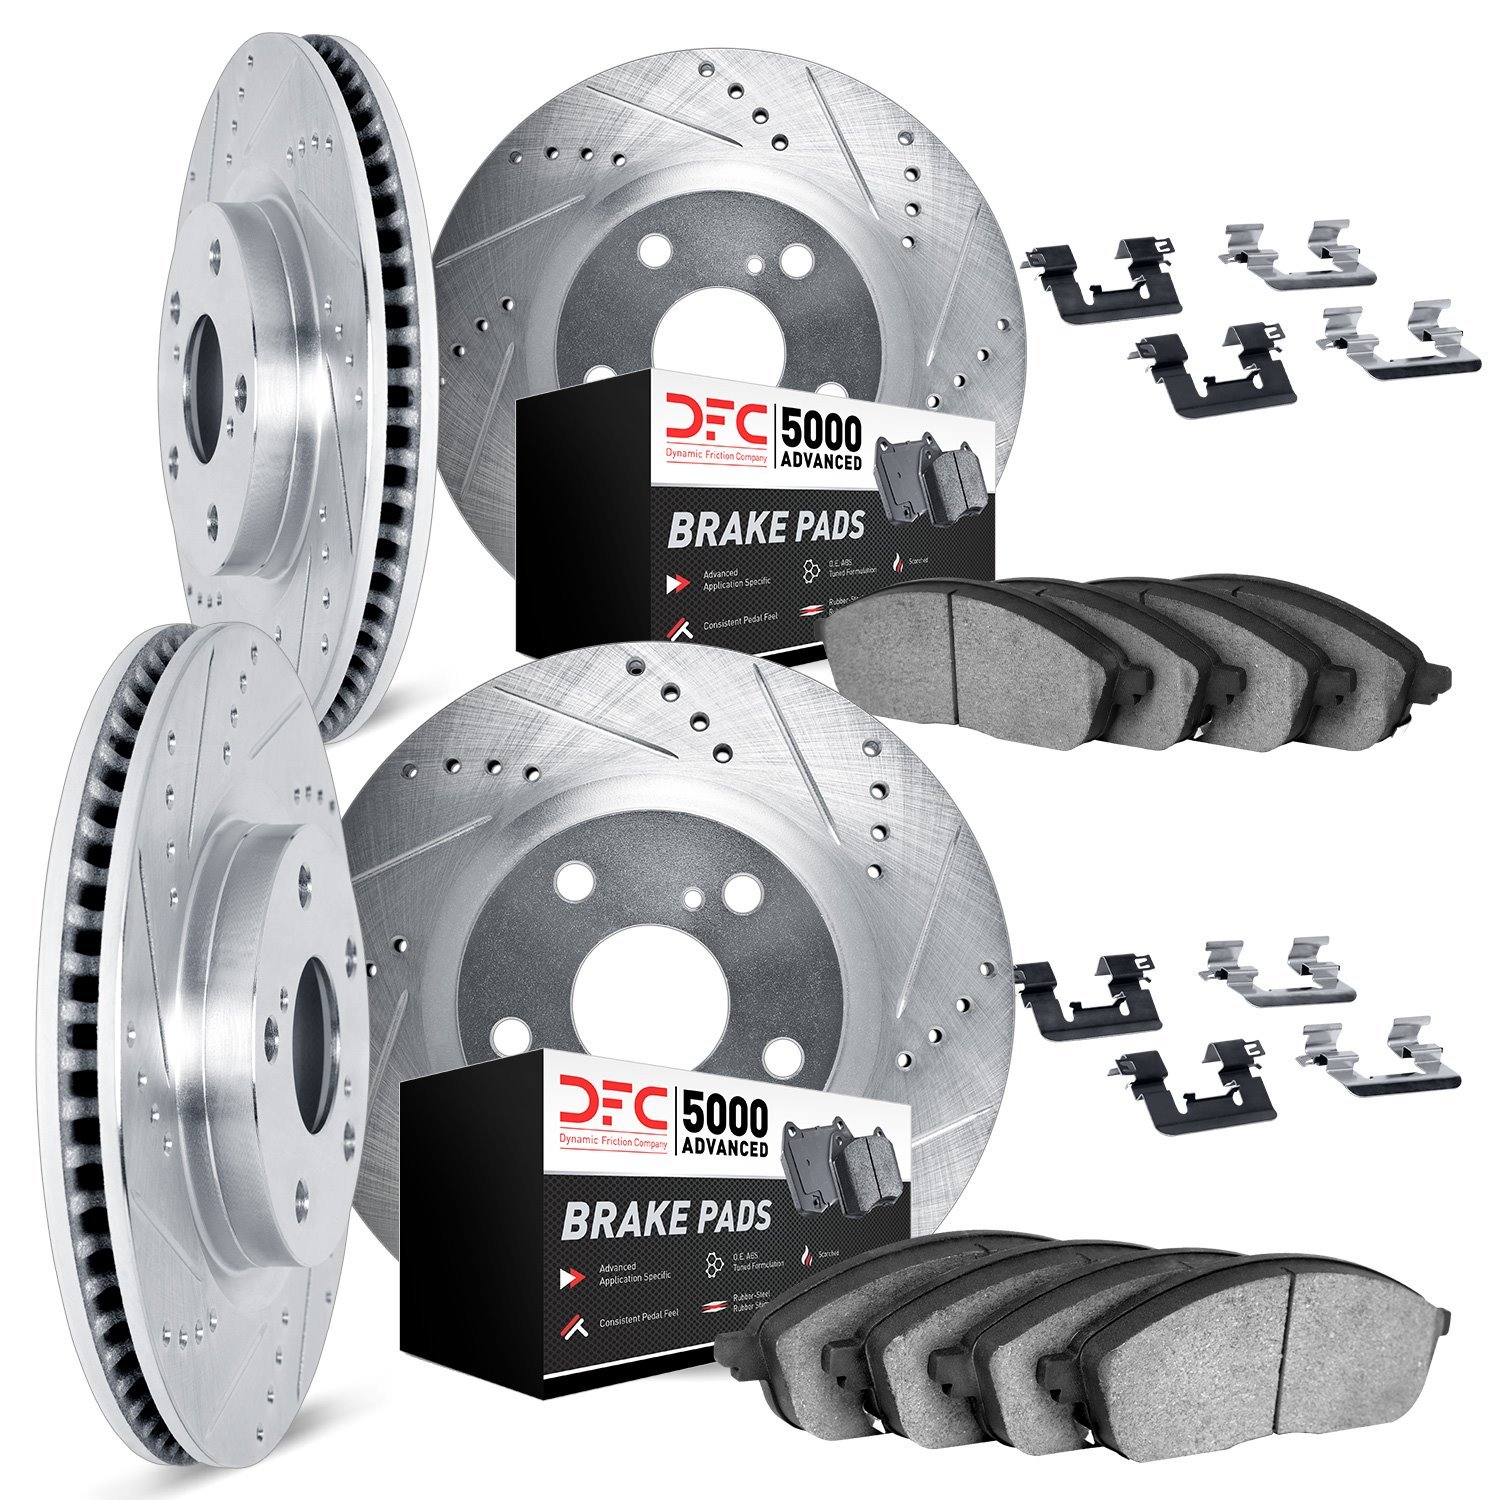 7514-39033 Drilled/Slotted Brake Rotors w/5000 Advanced Brake Pads Kit & Hardware [Silver], Fits Select Mopar, Position: Front a